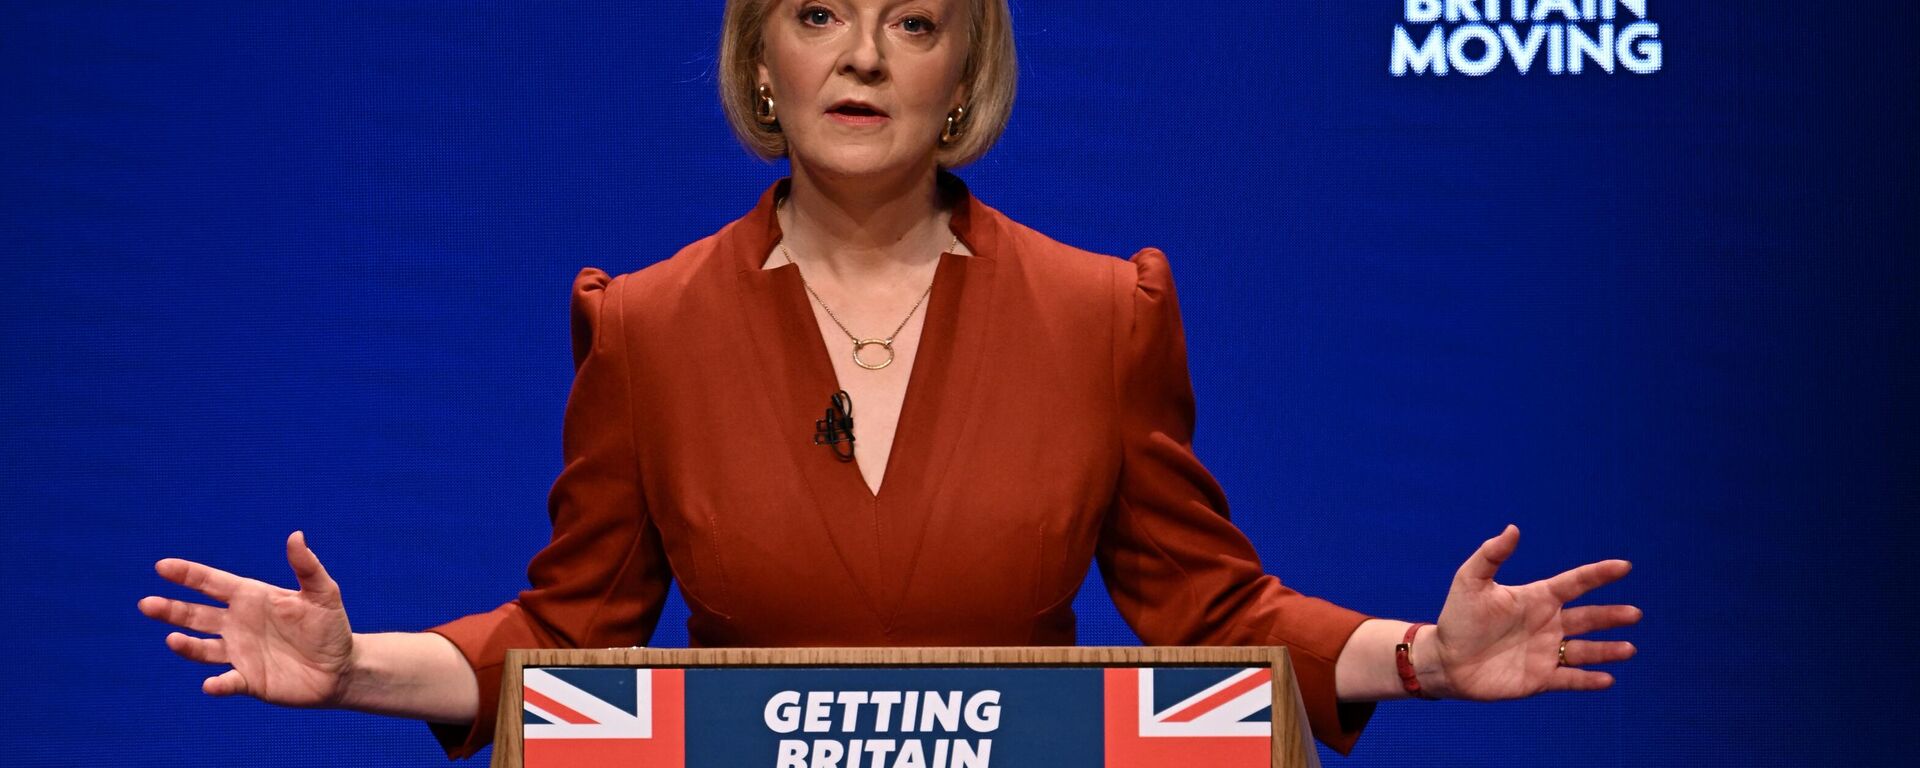 Britain's Prime Minister Liz Truss delivers her keynote address on the final day of the annual Conservative Party Conference in Birmingham, central England, on October 5, 2022 - Sputnik International, 1920, 05.10.2022